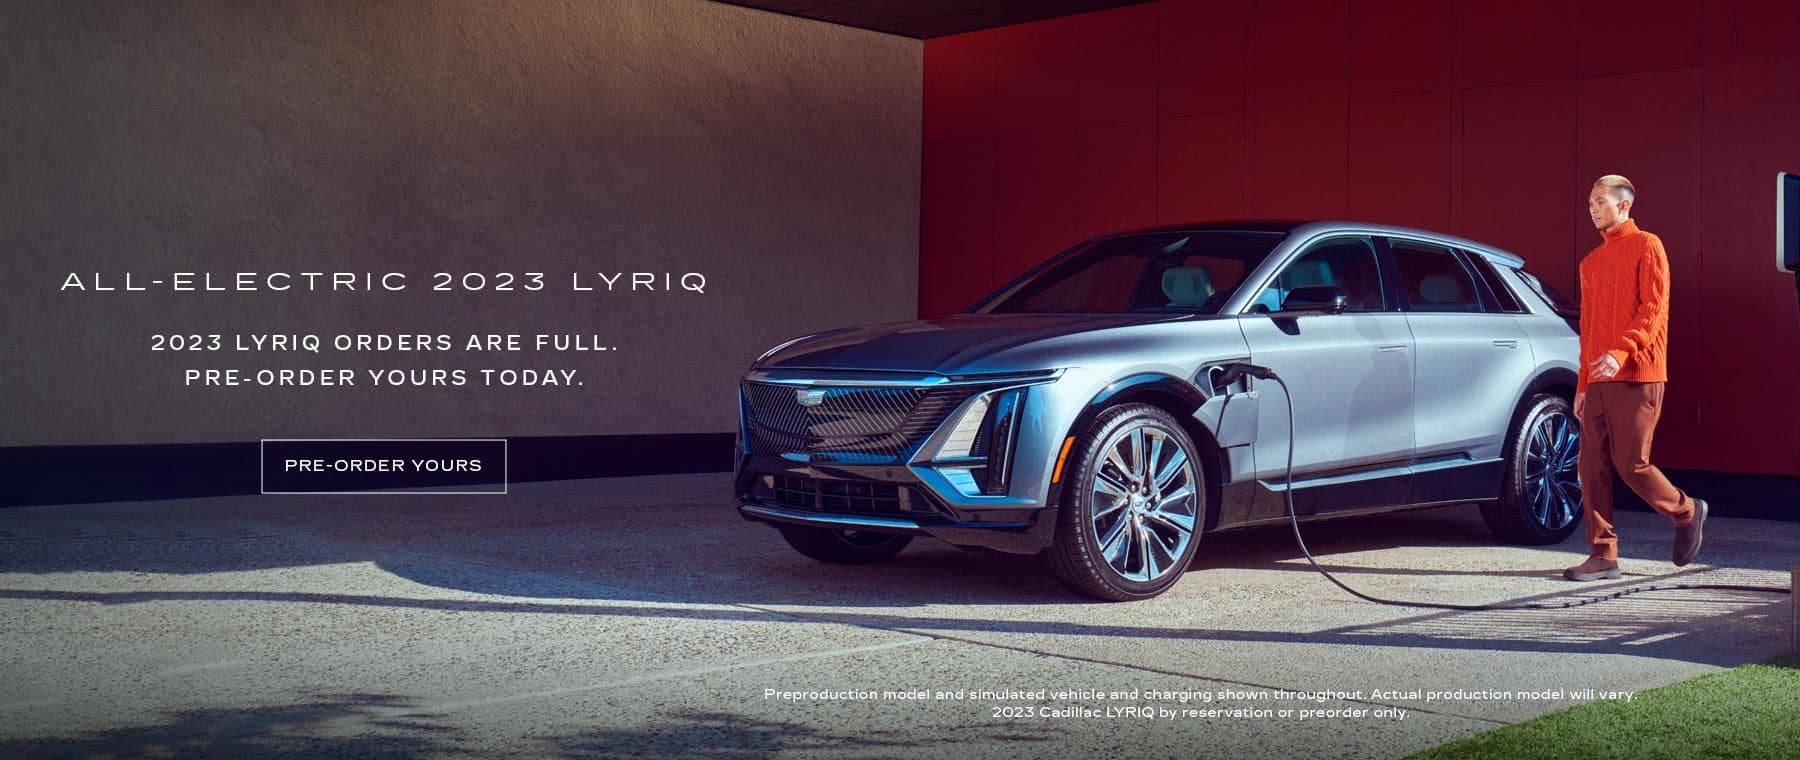 ALL-ELECTRIC 2023 LYRIQ. Be electrifying. Starting at: $62,990. As Shown: $64,540 Taking orders now.